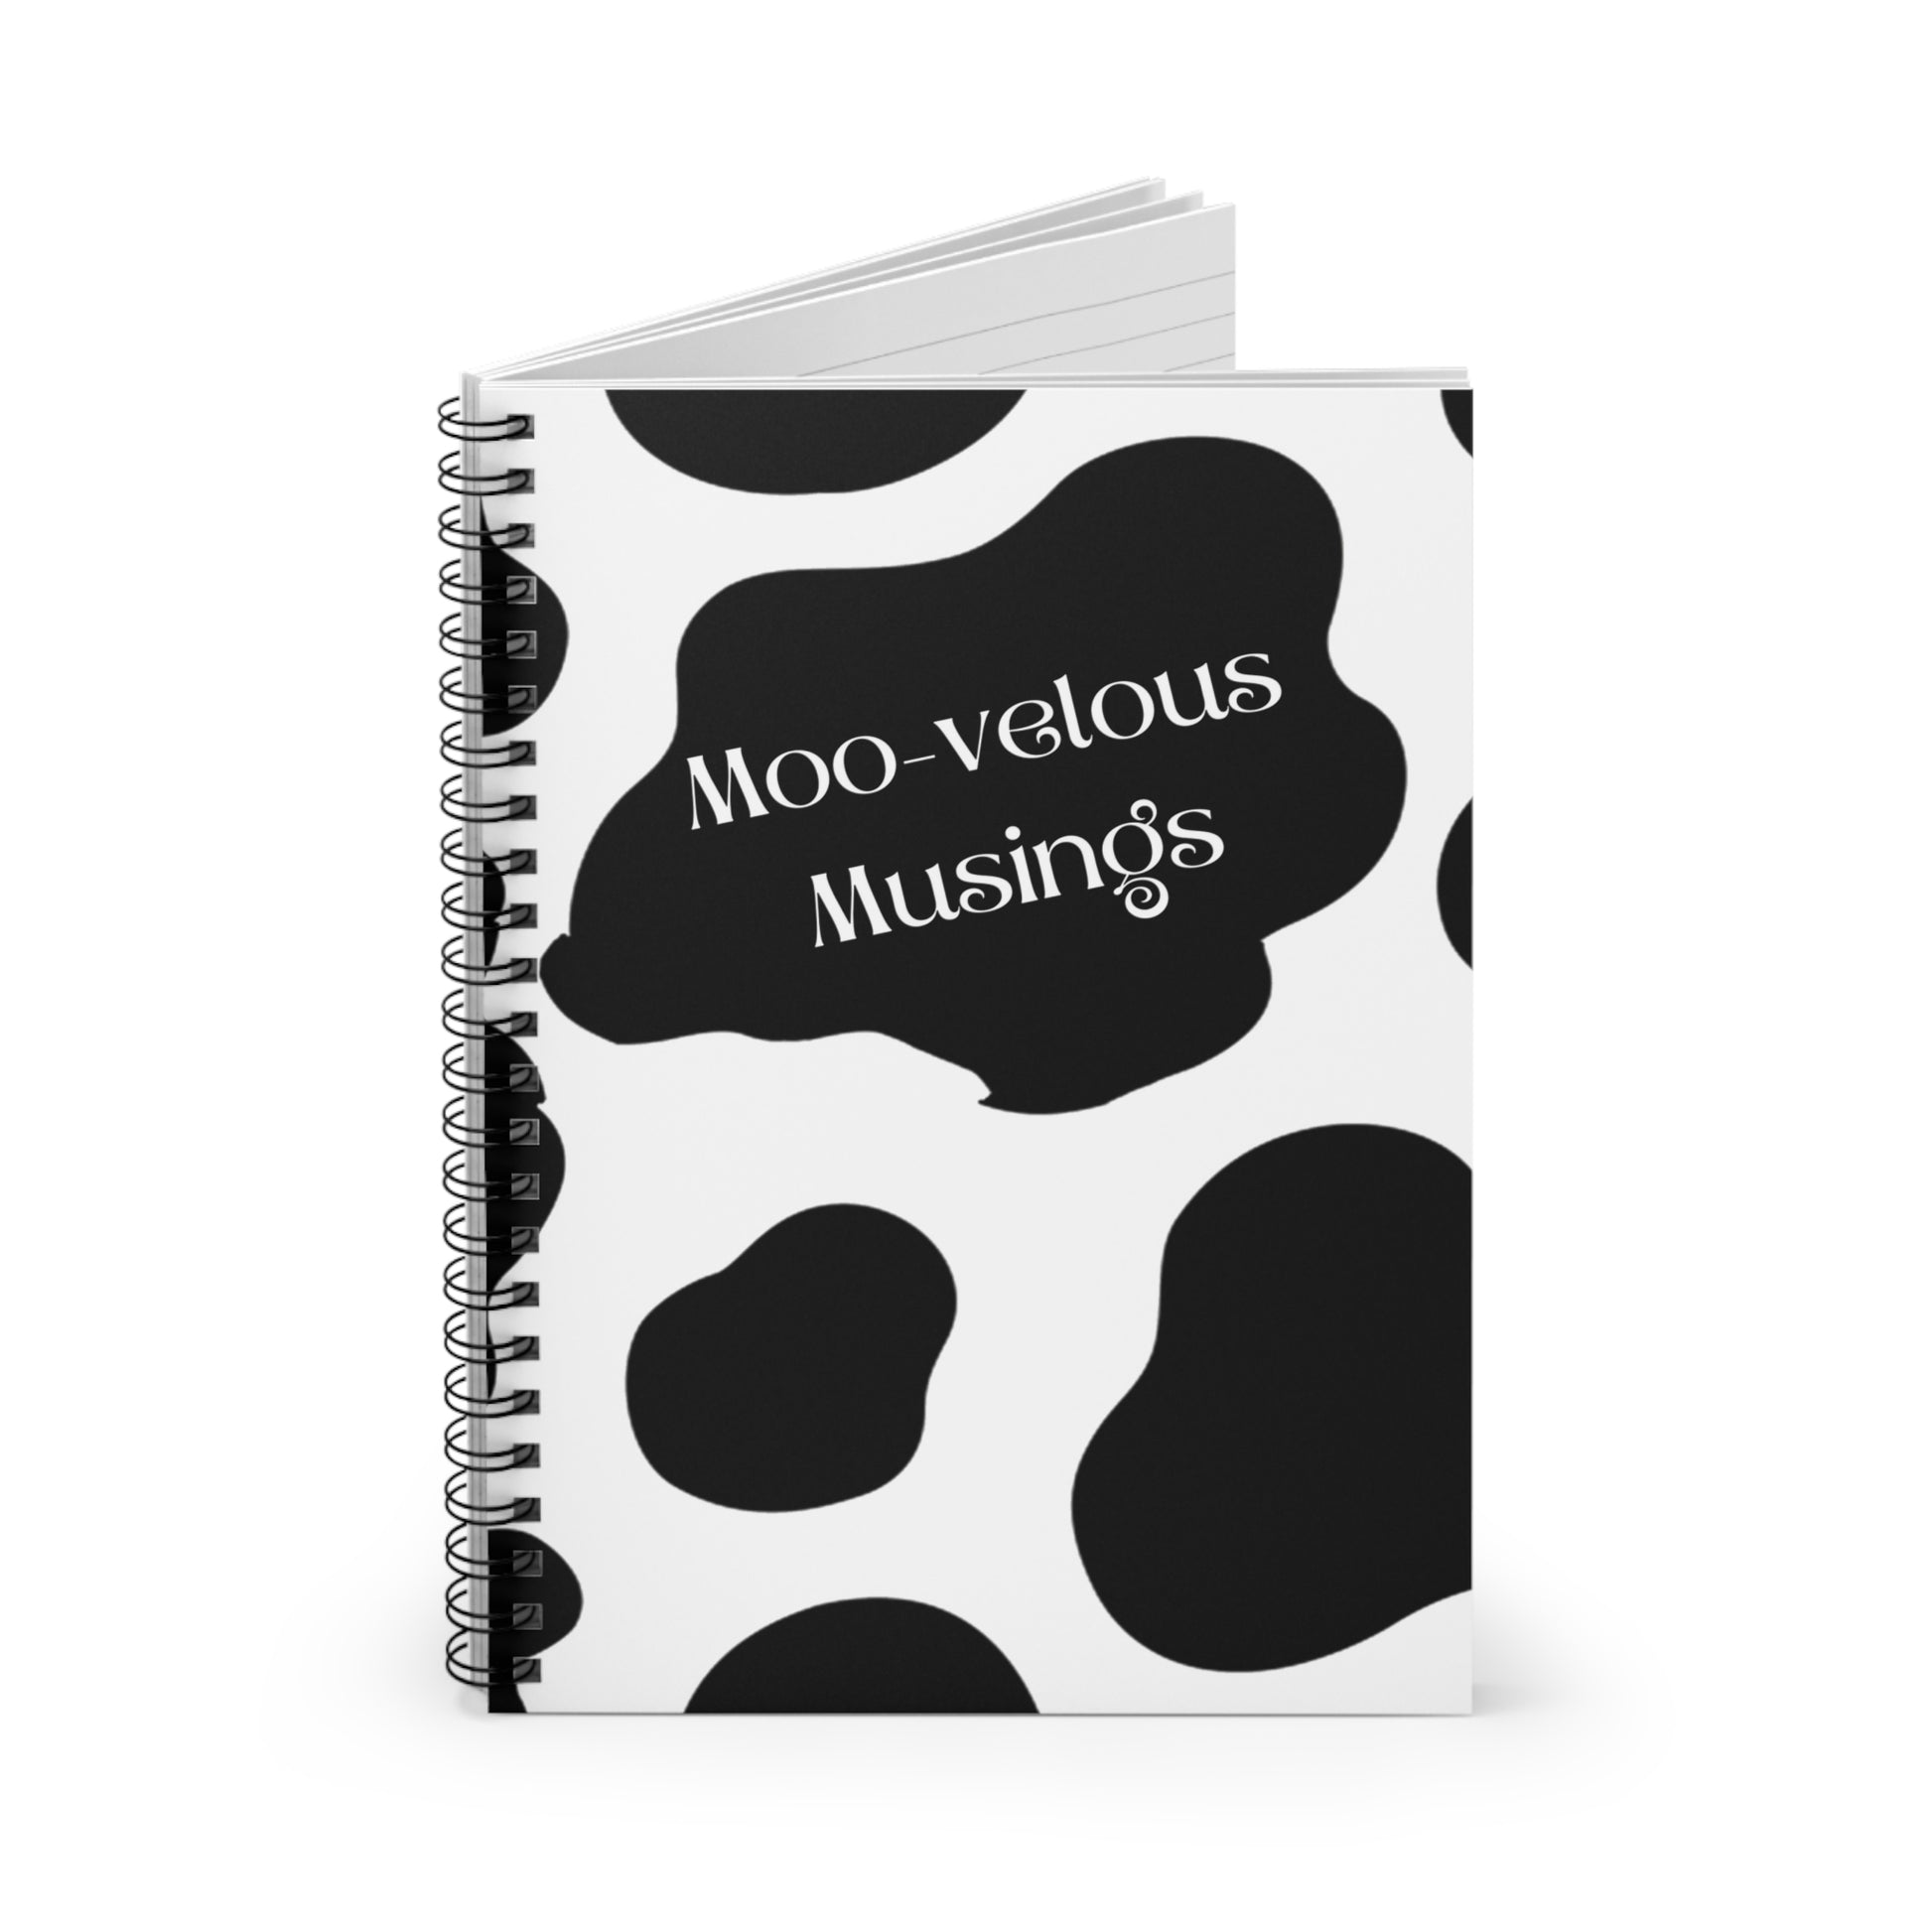 Moo-velous Musings: Spiral Notebook - Log Books - Journals - Diaries - and More Custom Printed by TheGlassyLass